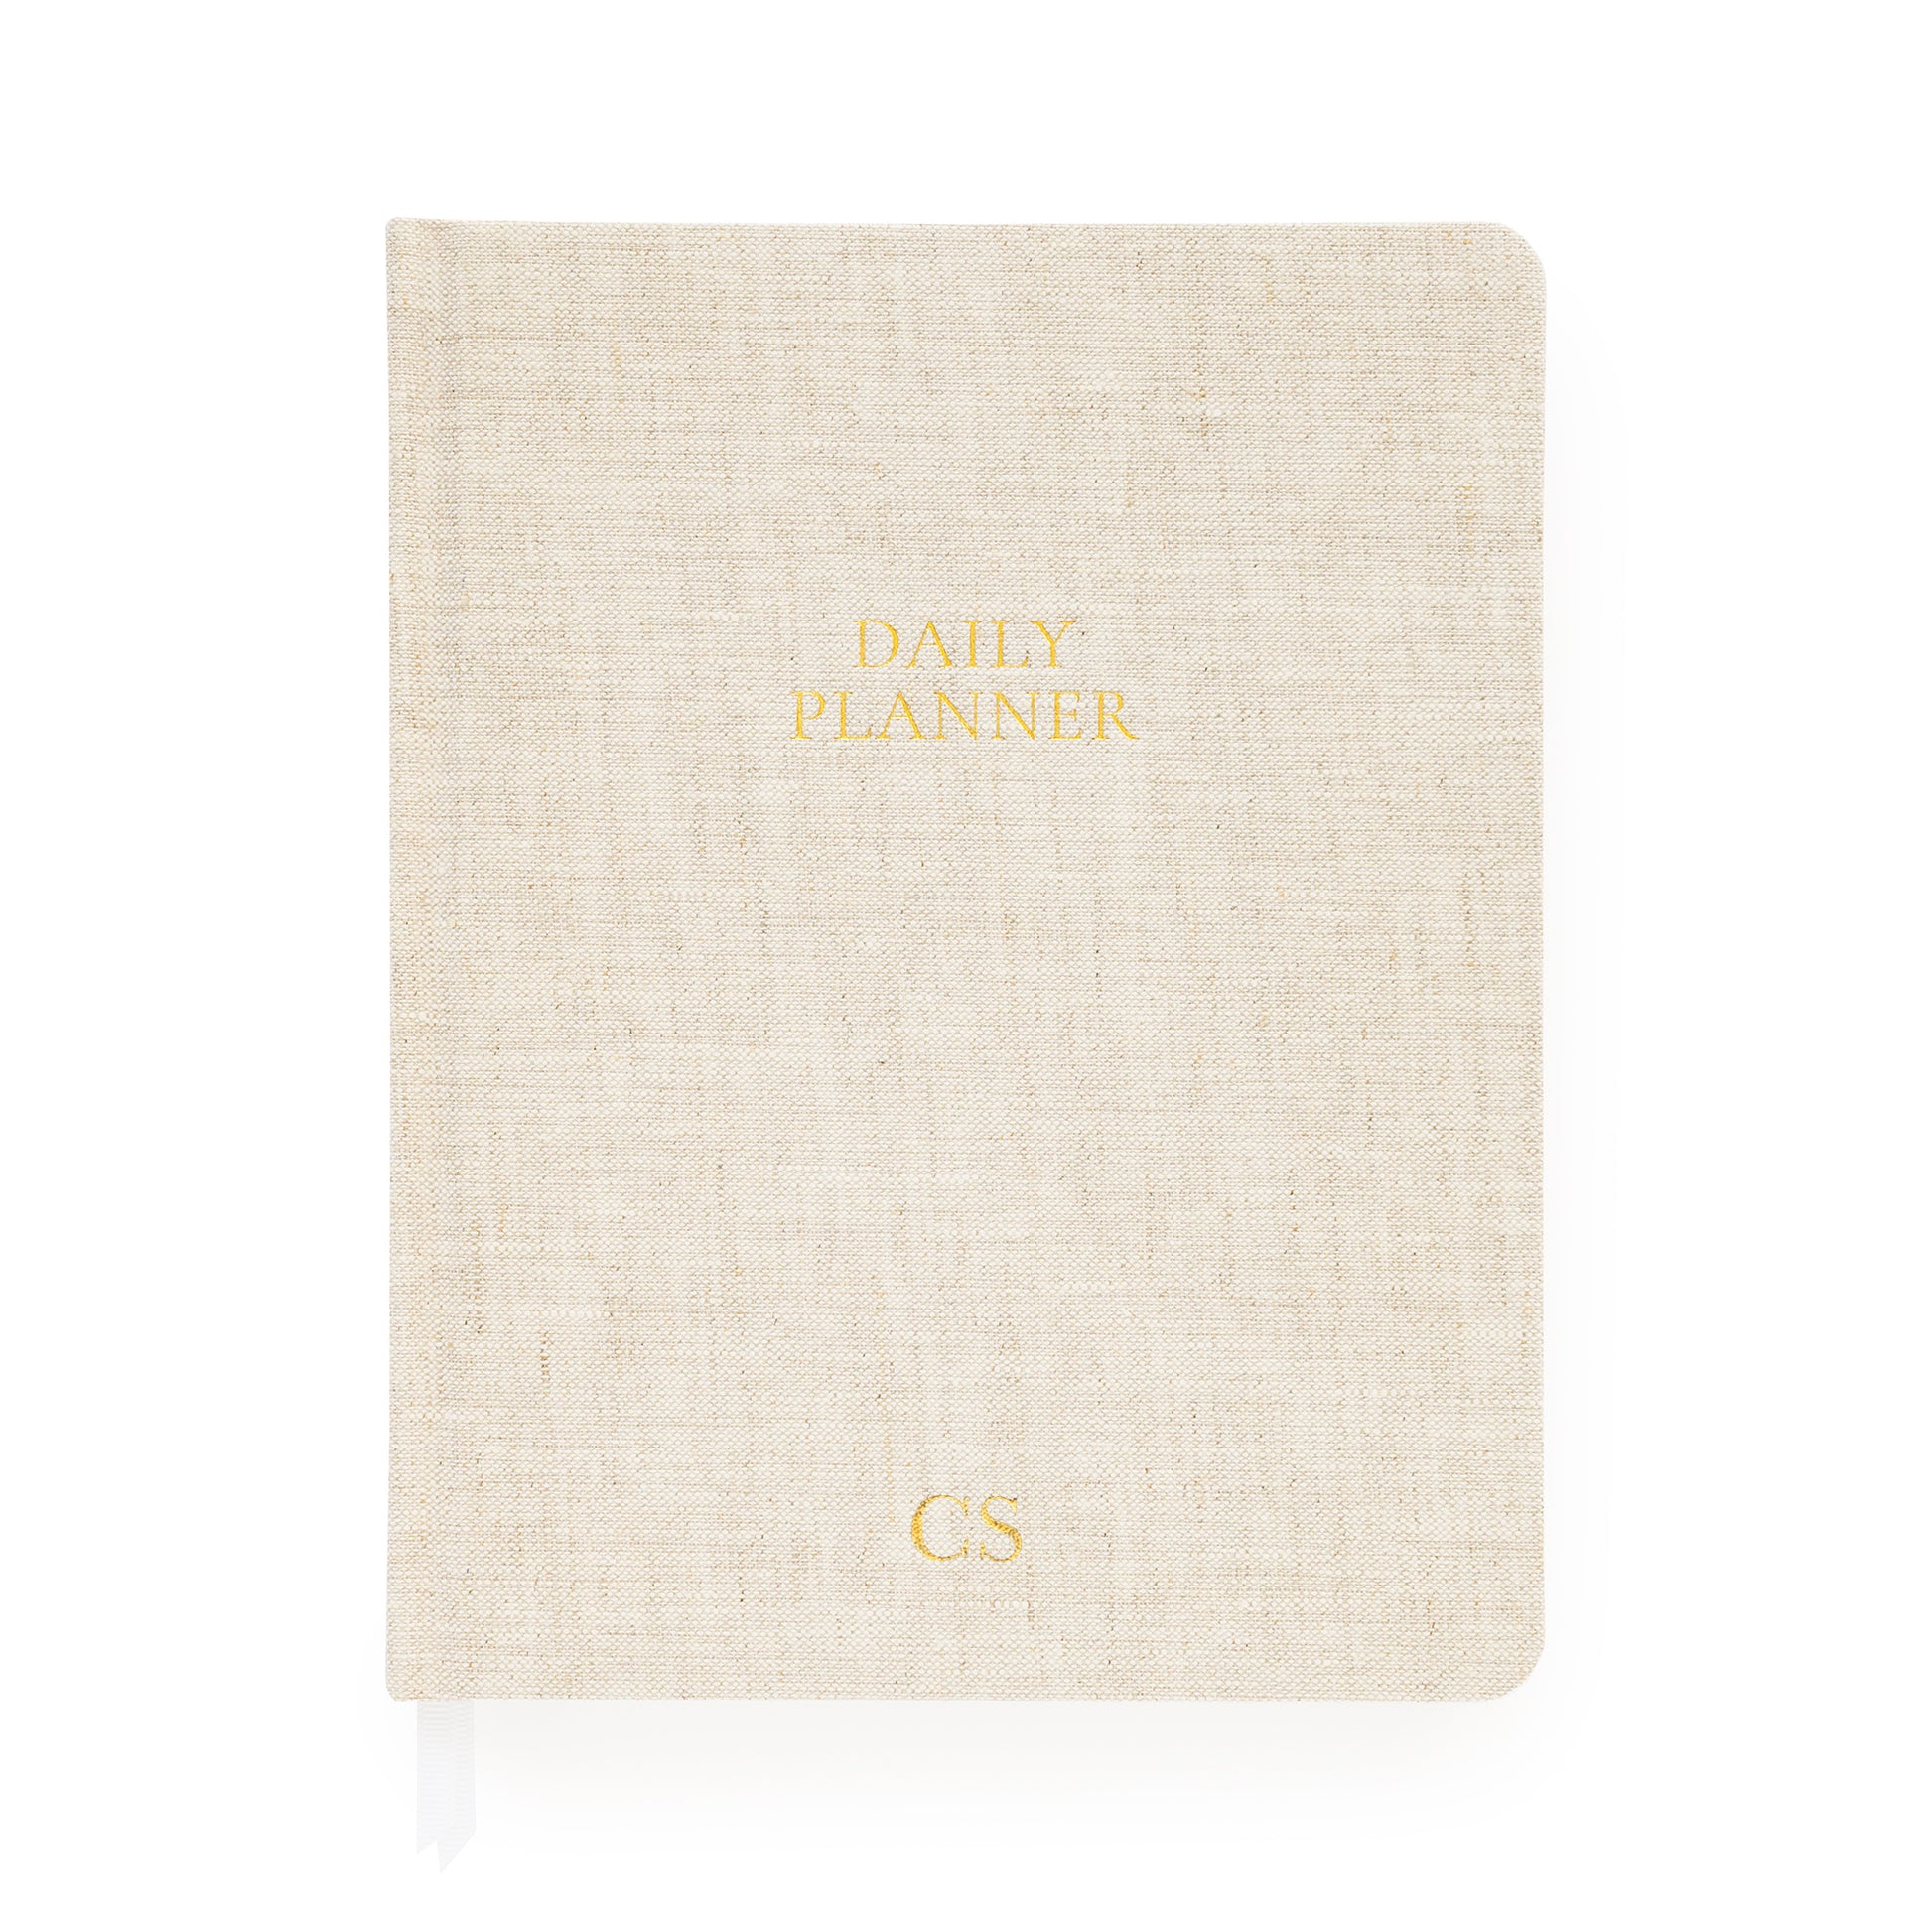 Flax daily planner with gold foil monogram